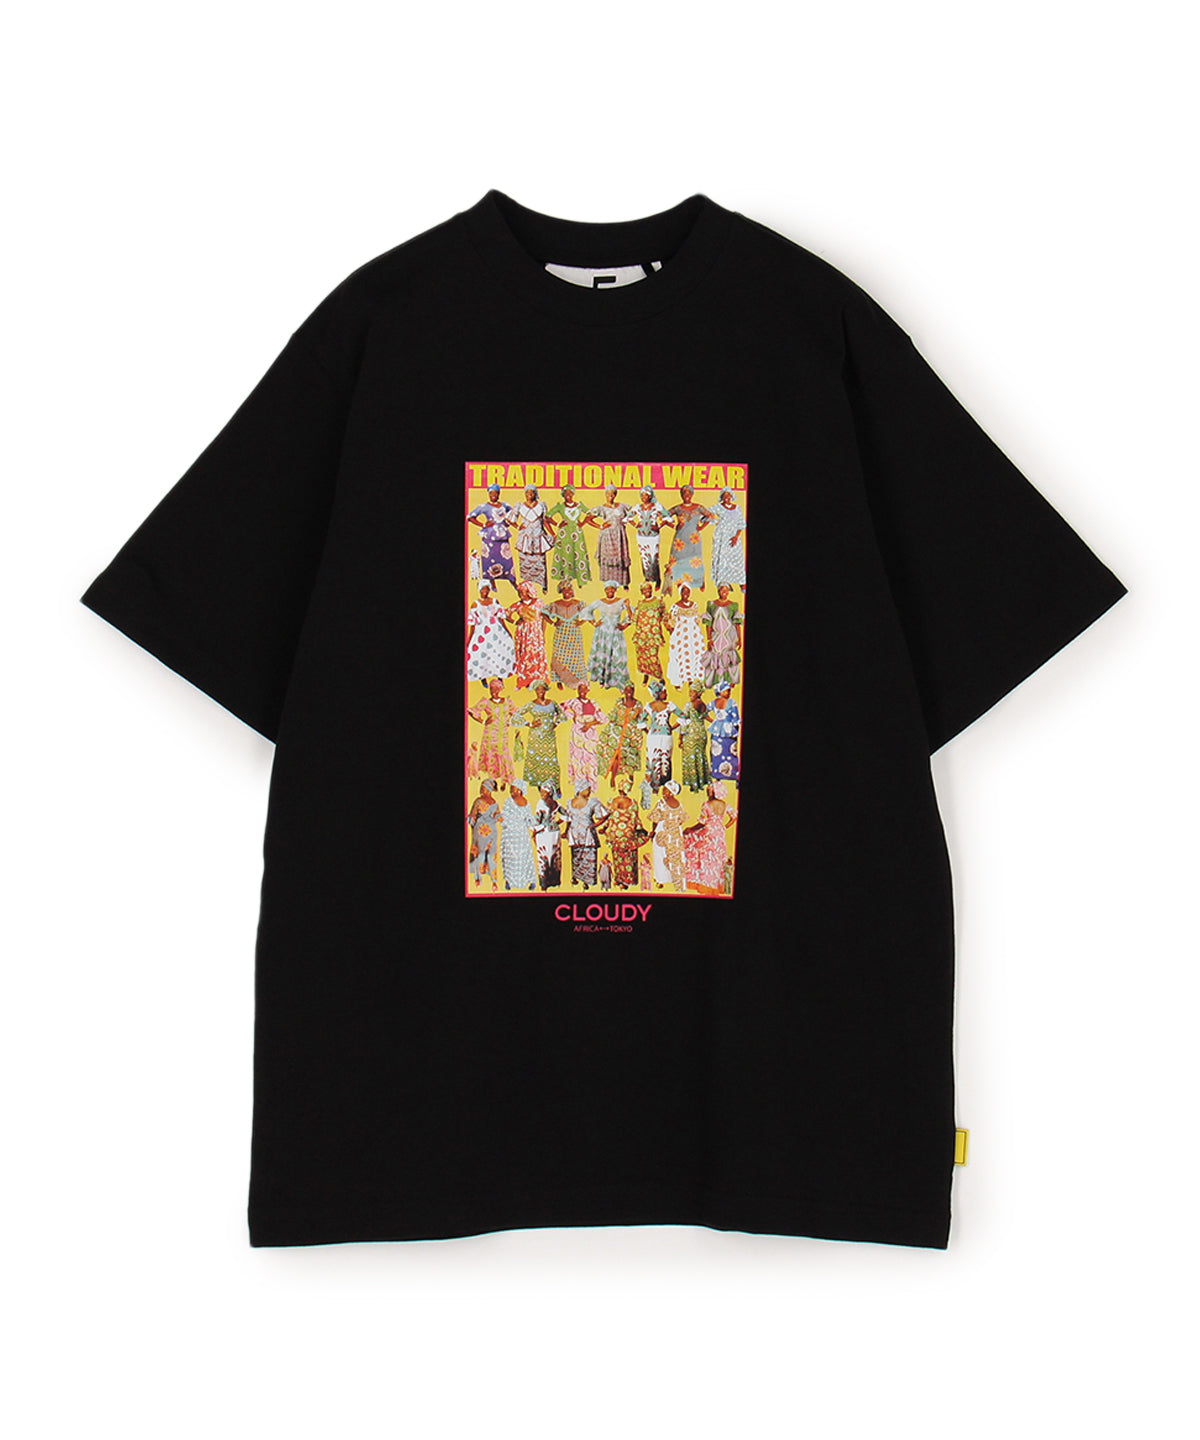 Lunch T-shirts TRADITIONAL WEAR BLACK